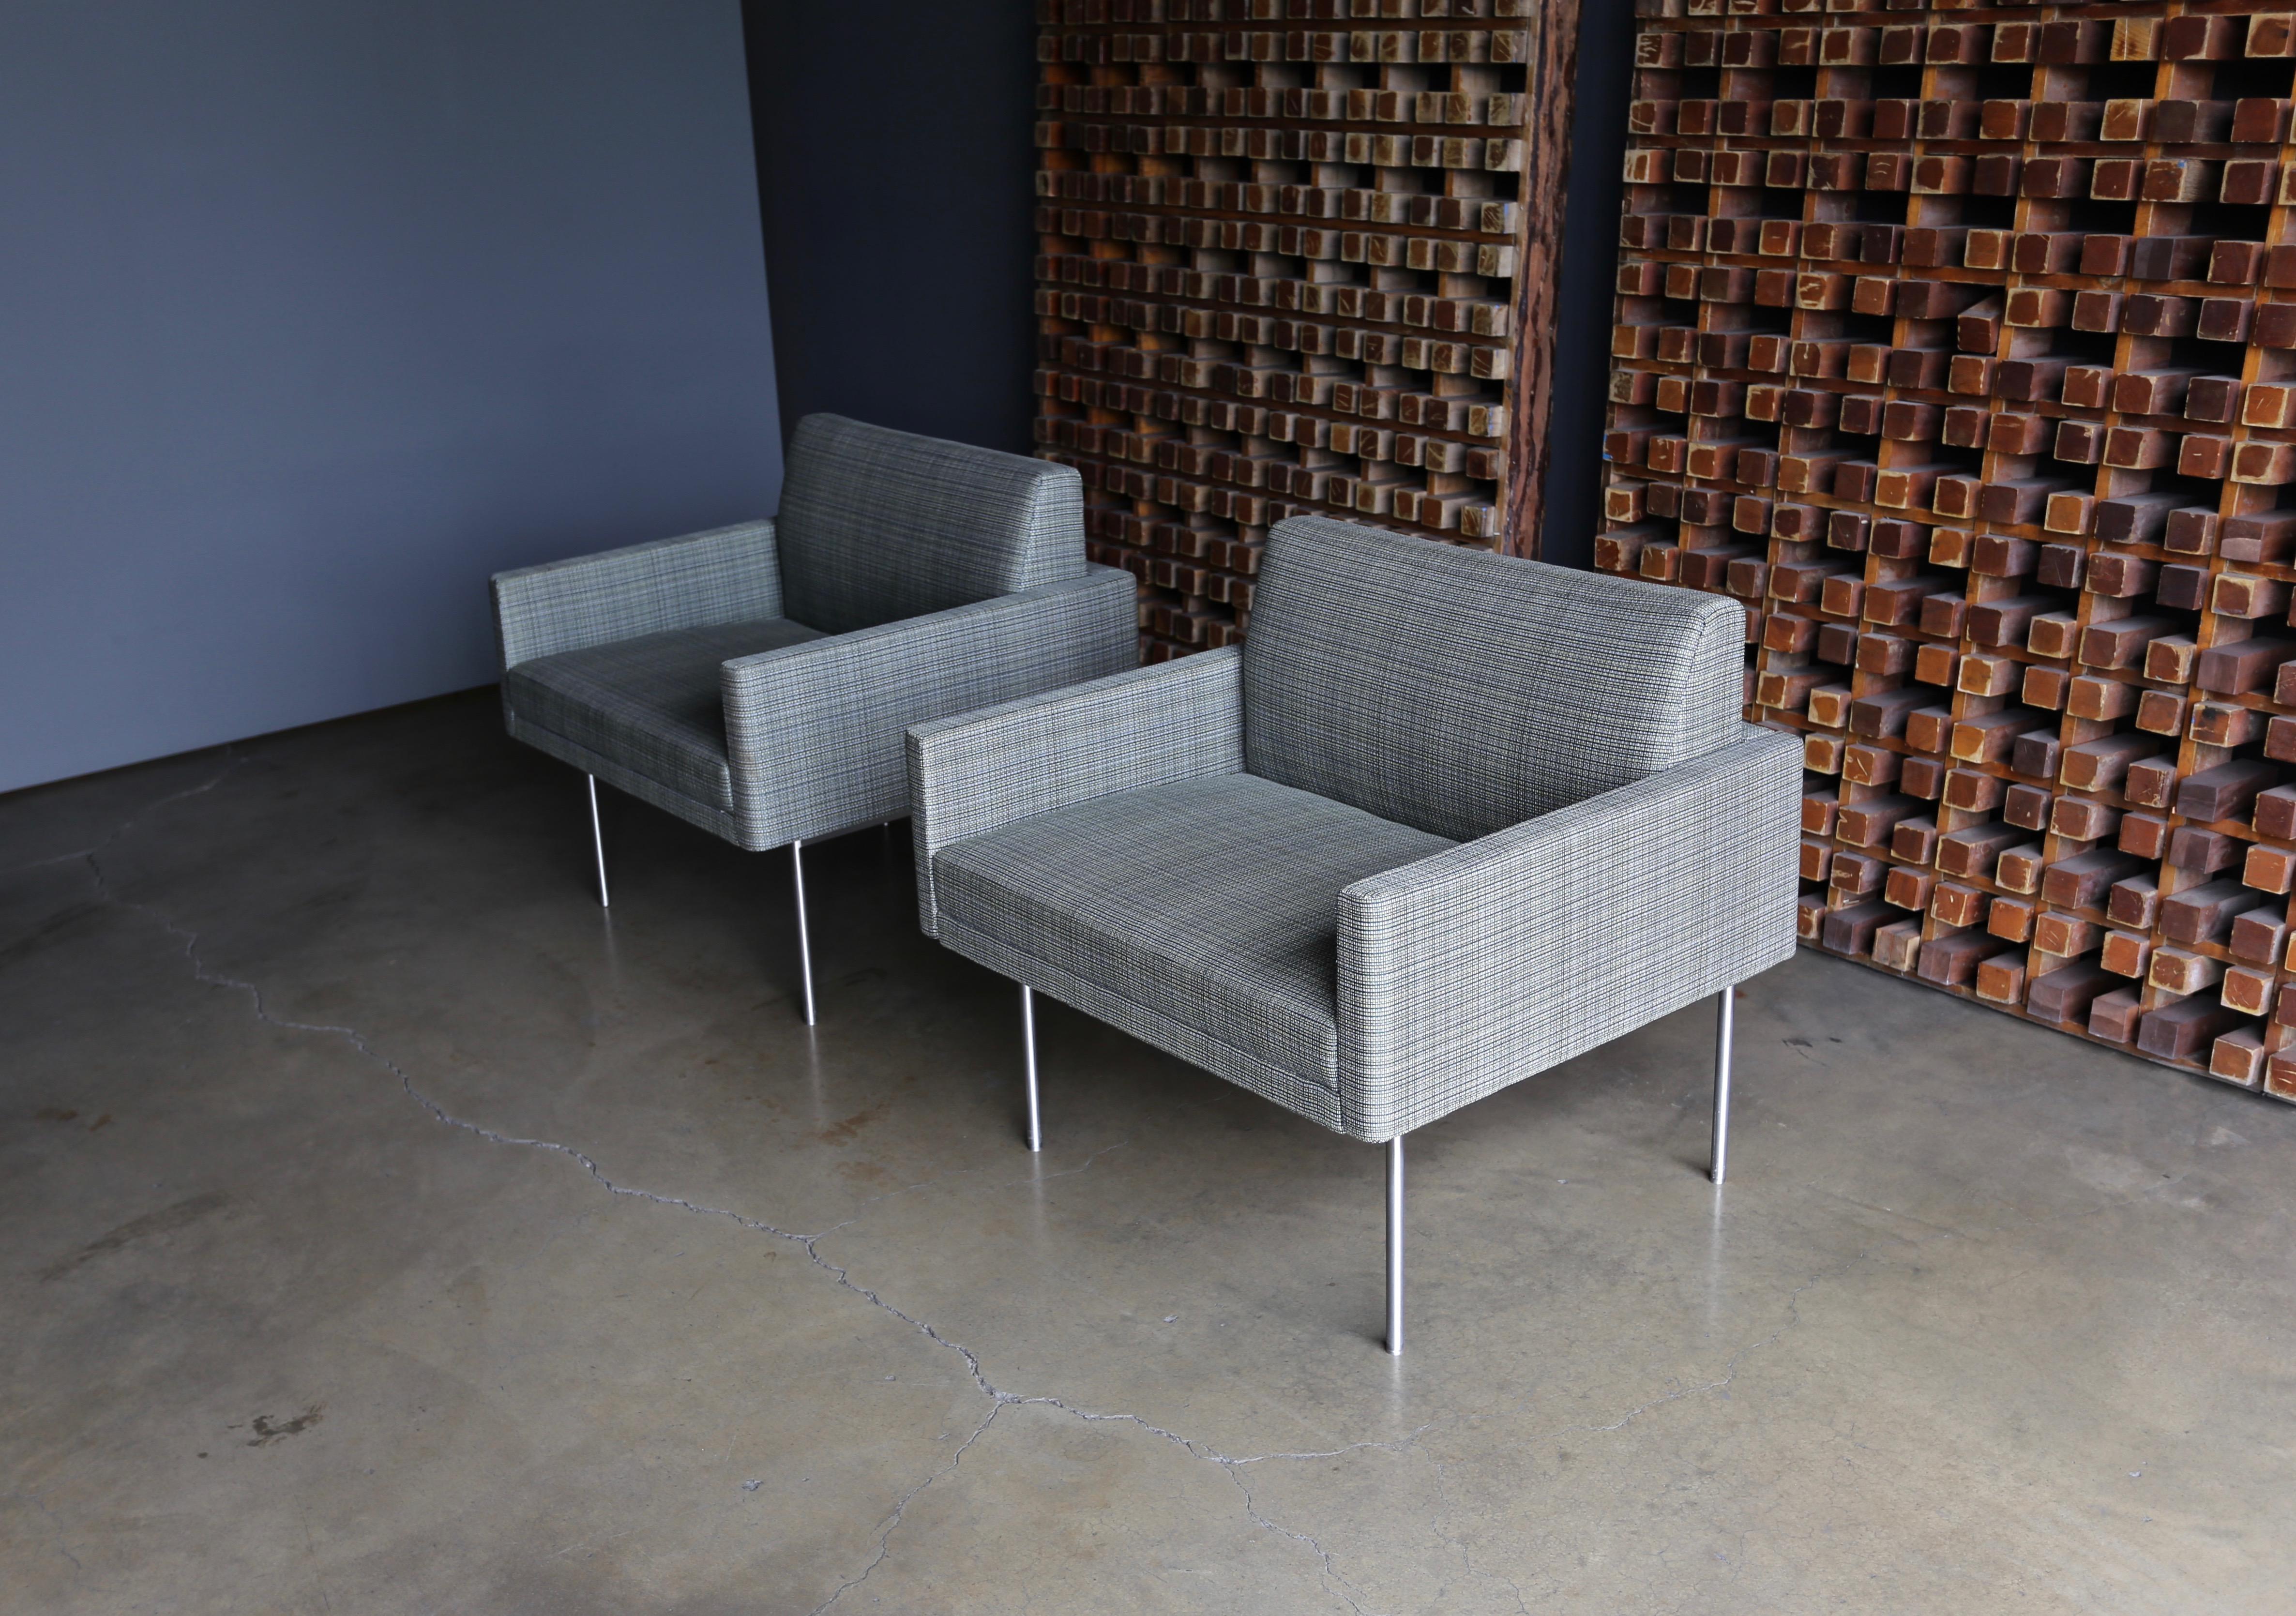 Bassam Fellows Tuxedo component lounge chairs for Geiger, 2015.